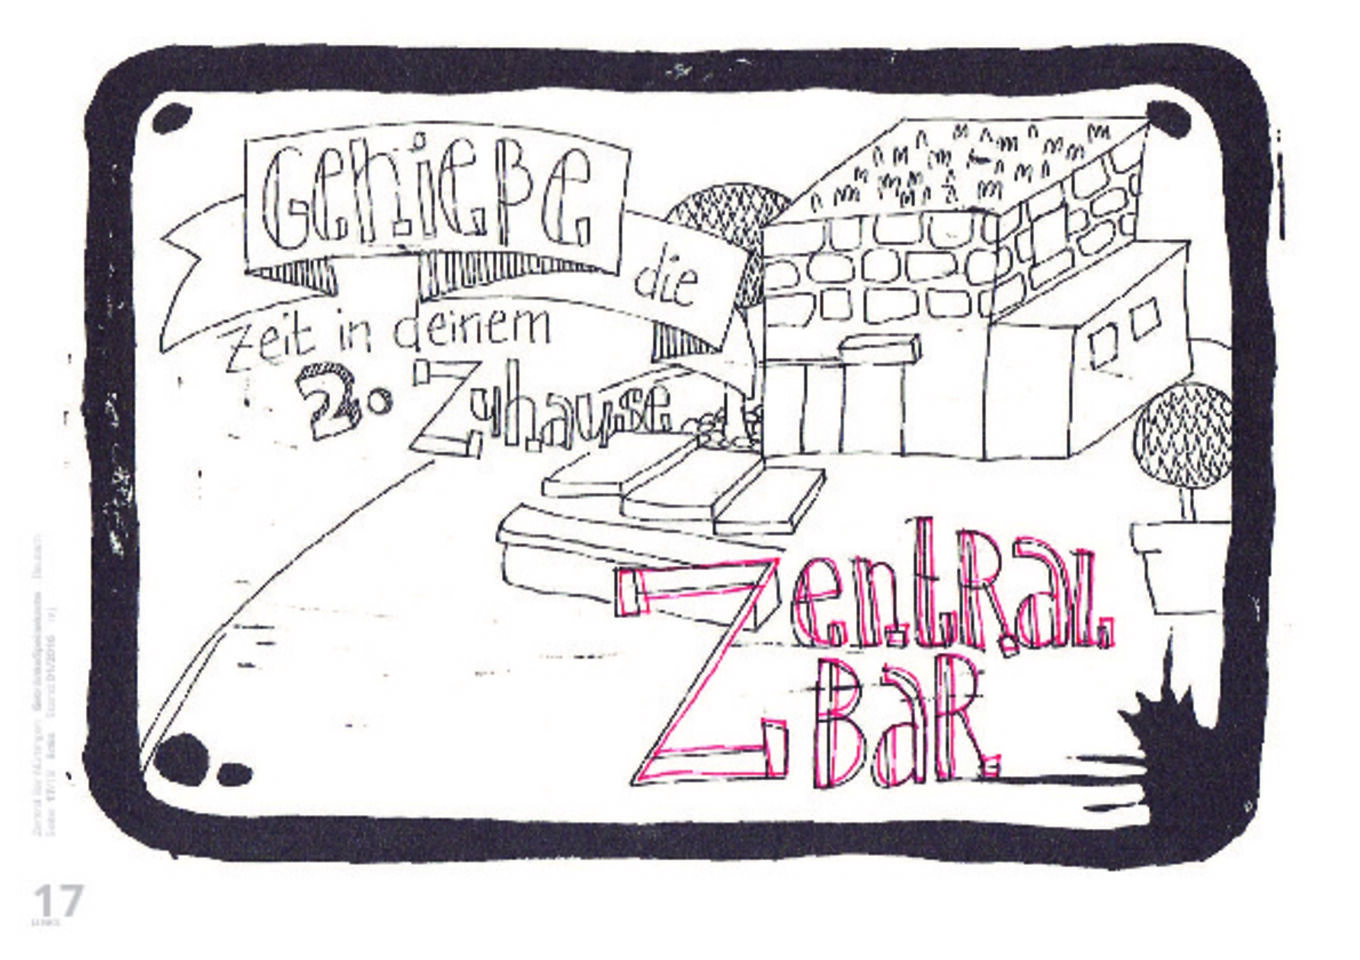 A photo of Zentral Bar